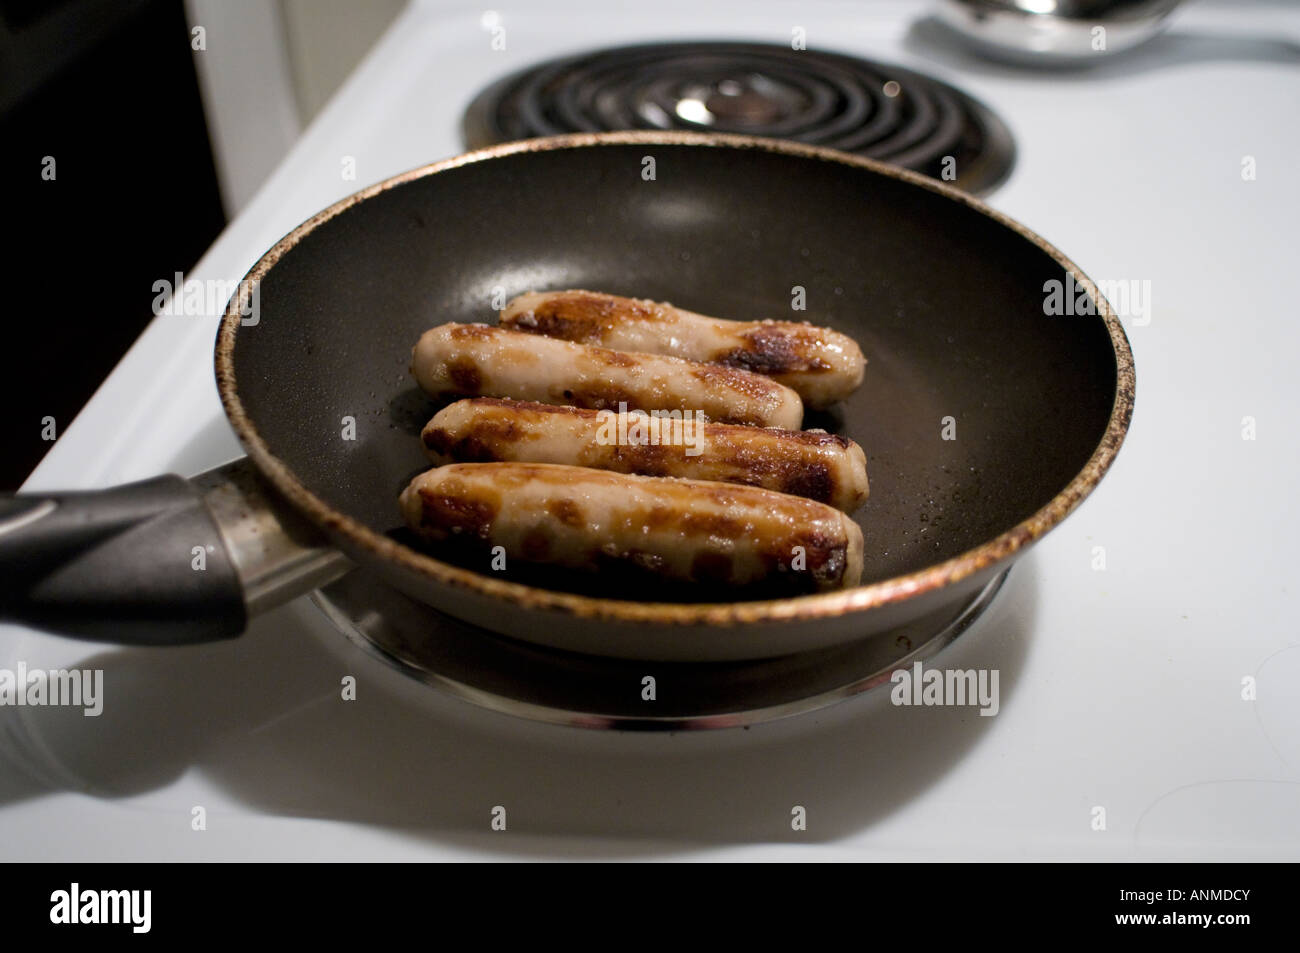 Four sausage links in a frying pan on a white stove Stock Photo